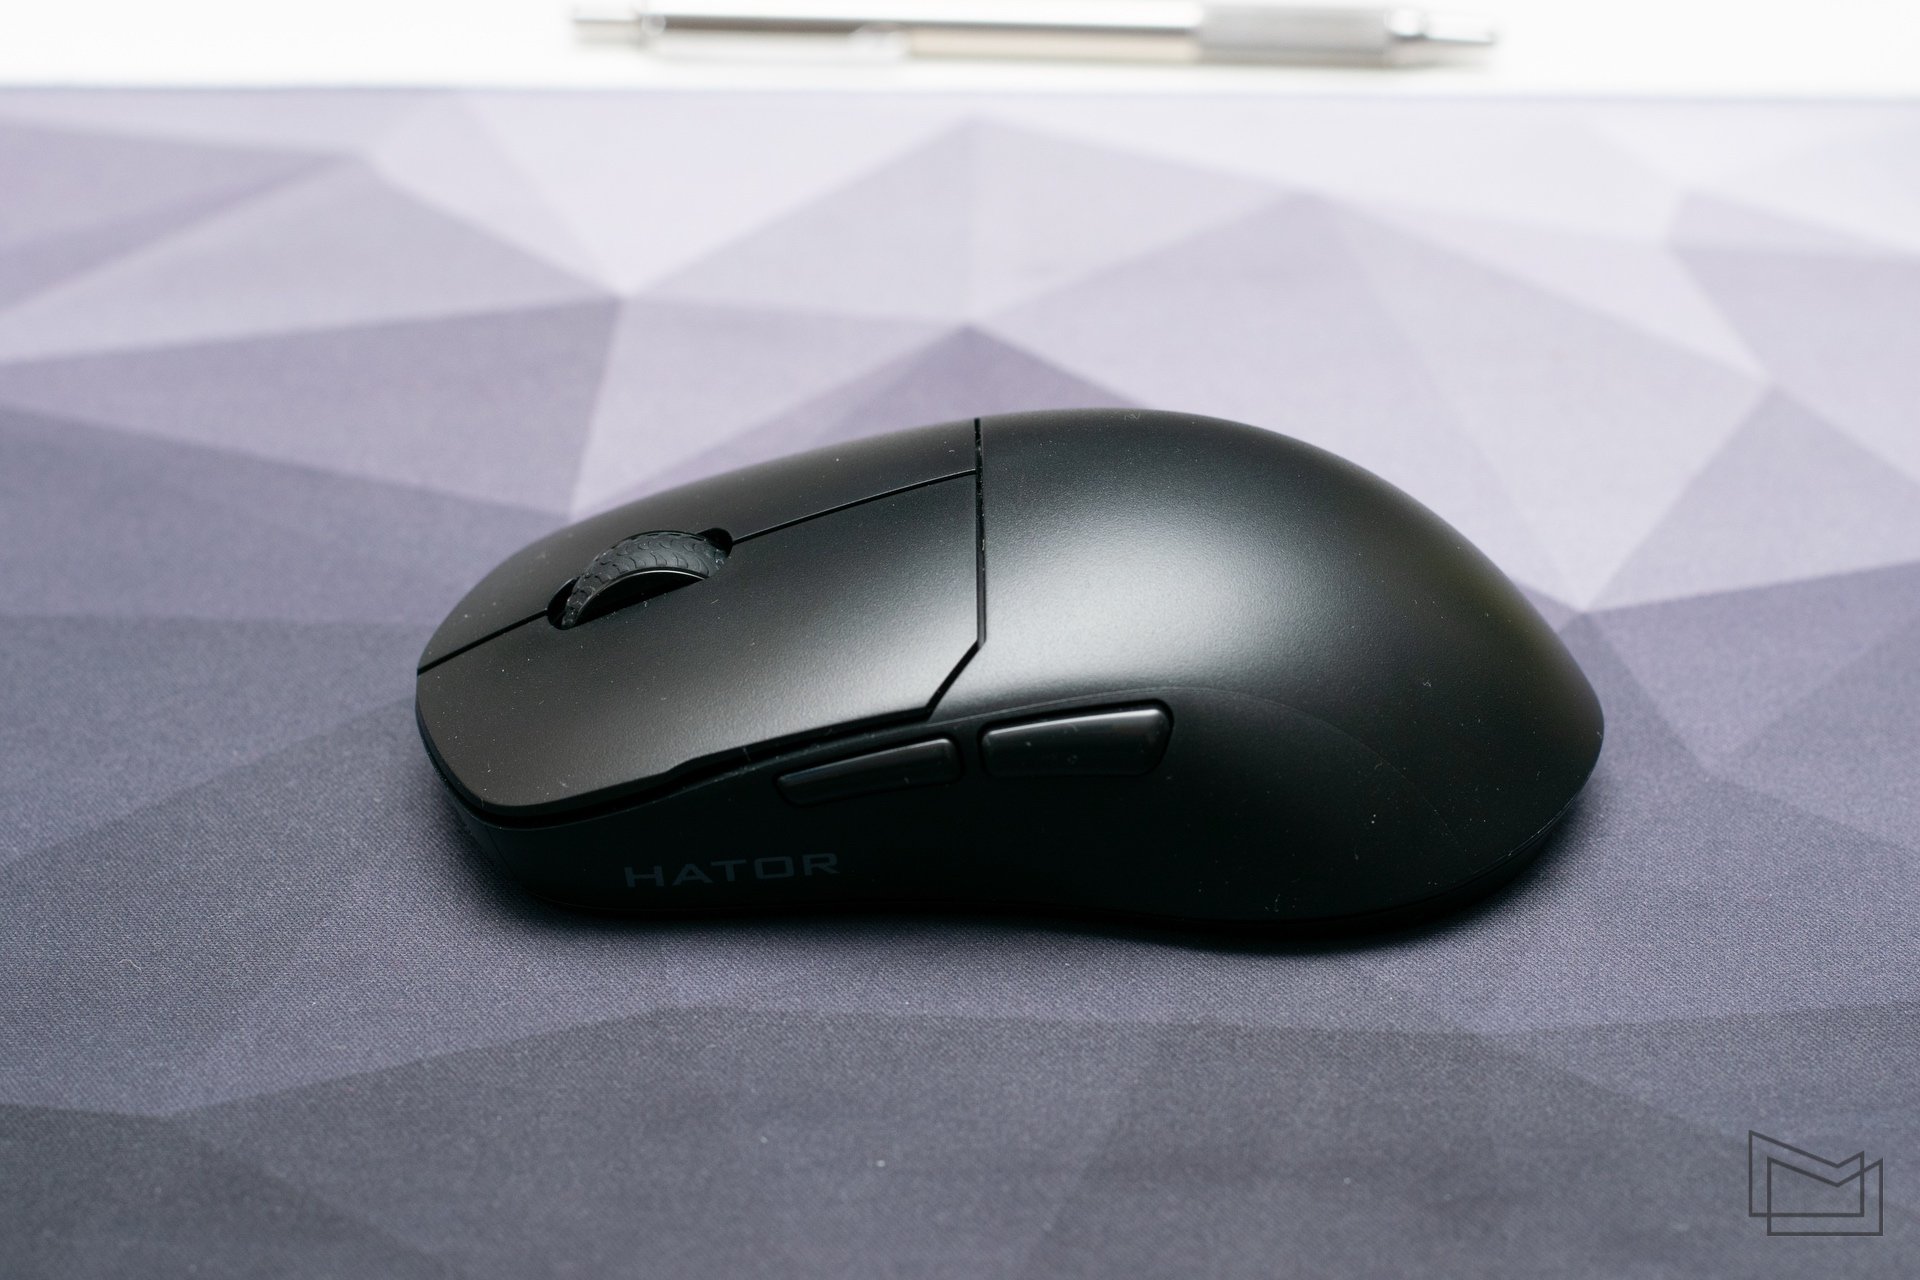 Hator Quasar Wireless gaming mouse review